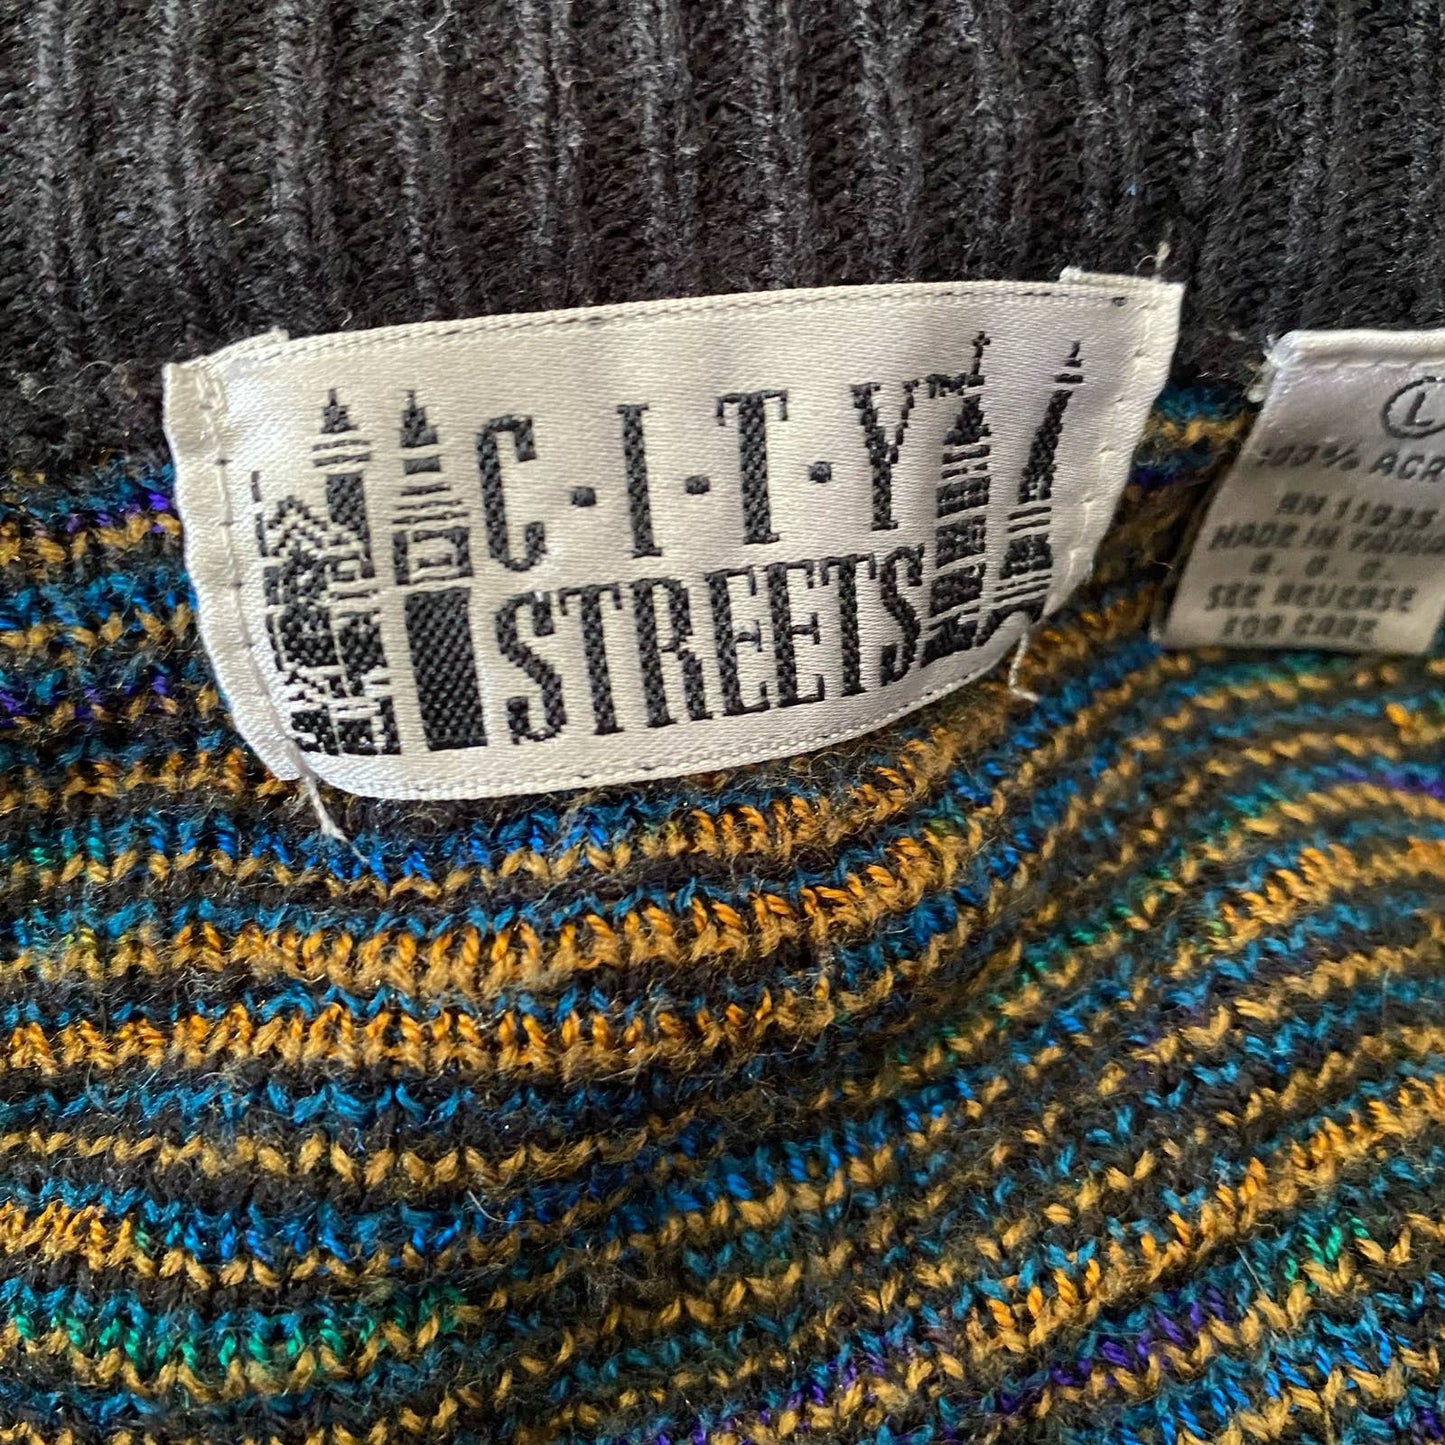 City Streets sz L vintage wool pull over sweater